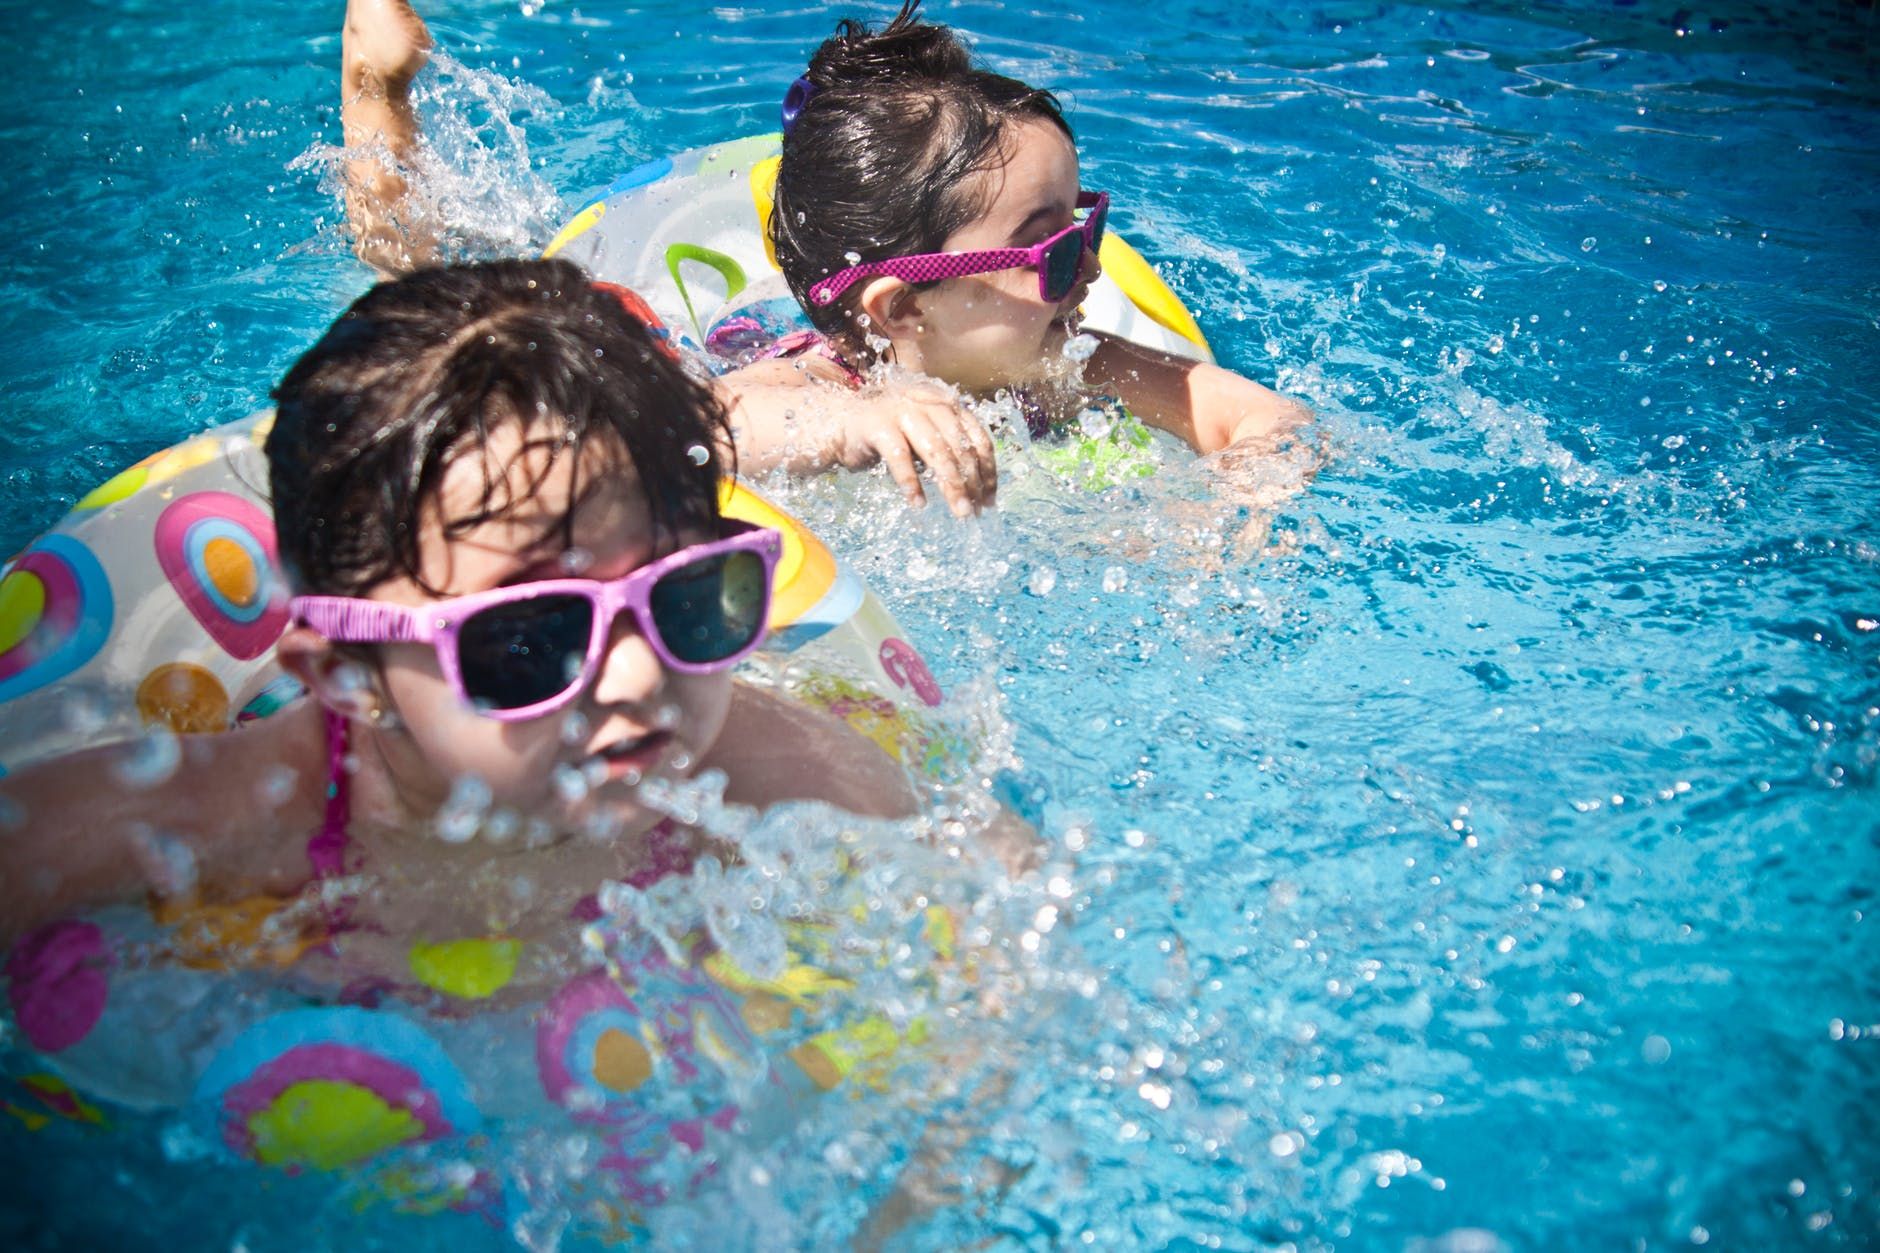 Swimming Pool Accident Lawyer: The Top Common Causes of Swimming Pool Accidents